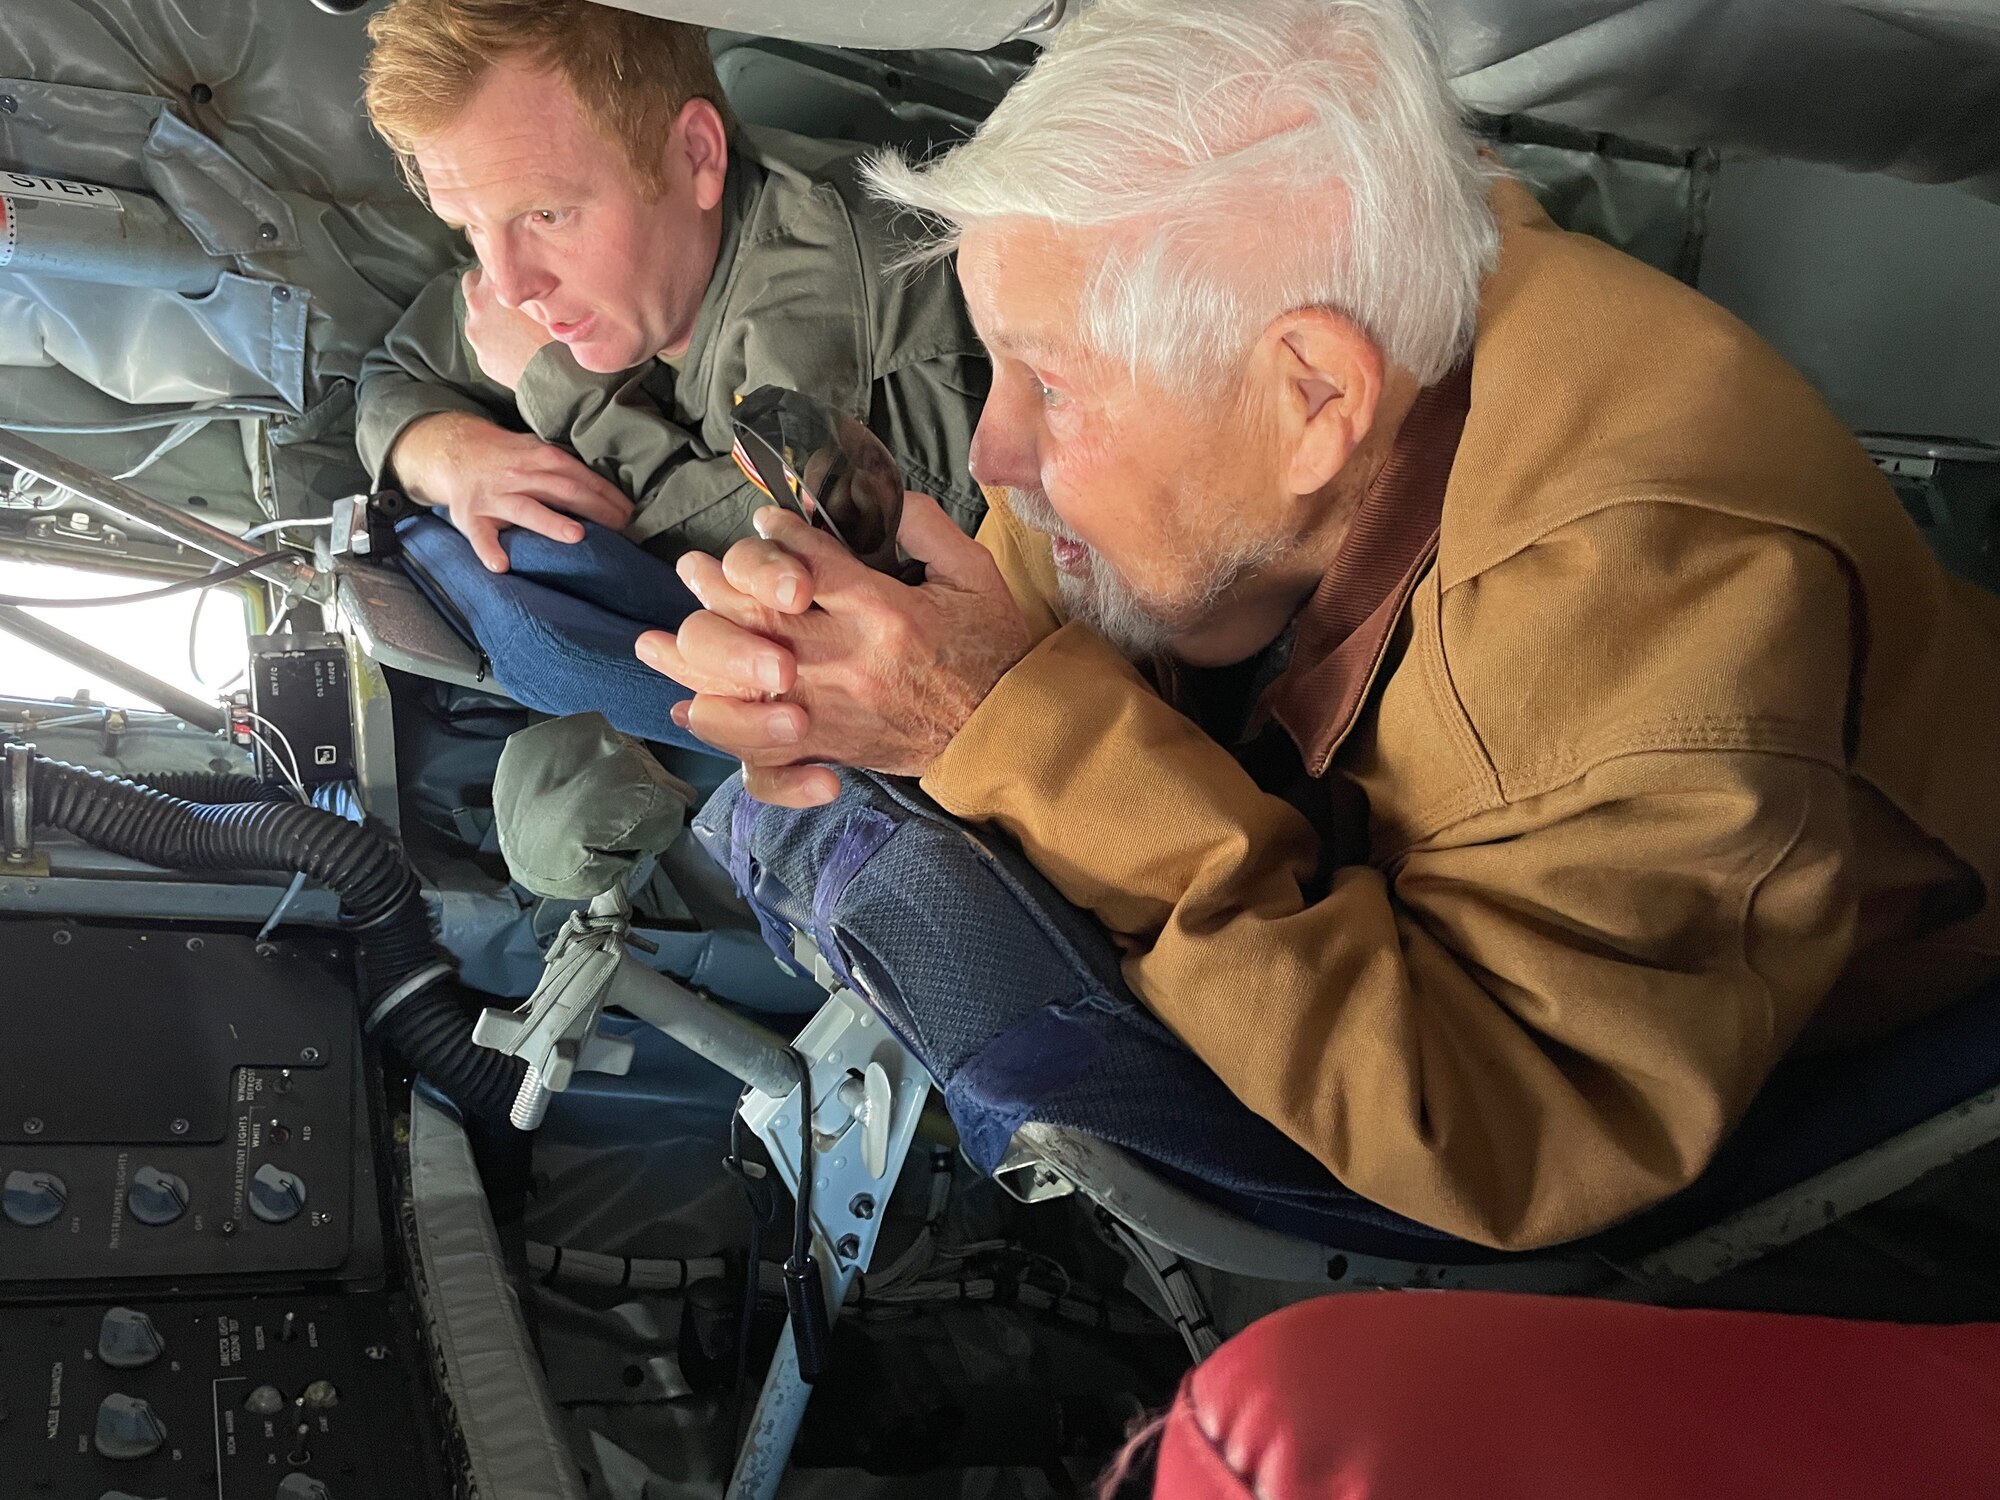 U.S. Air Force Tech. Sgt. Joshua Schultz, 186th Air Refueling Wing boom operator, shows James Roberts, a former U.S. Air Force boom operator, the controls in the boom pod of a KC-135R aircraft, Nov. 6, 2021, at Key Field Air National Guard Base, Mississippi.